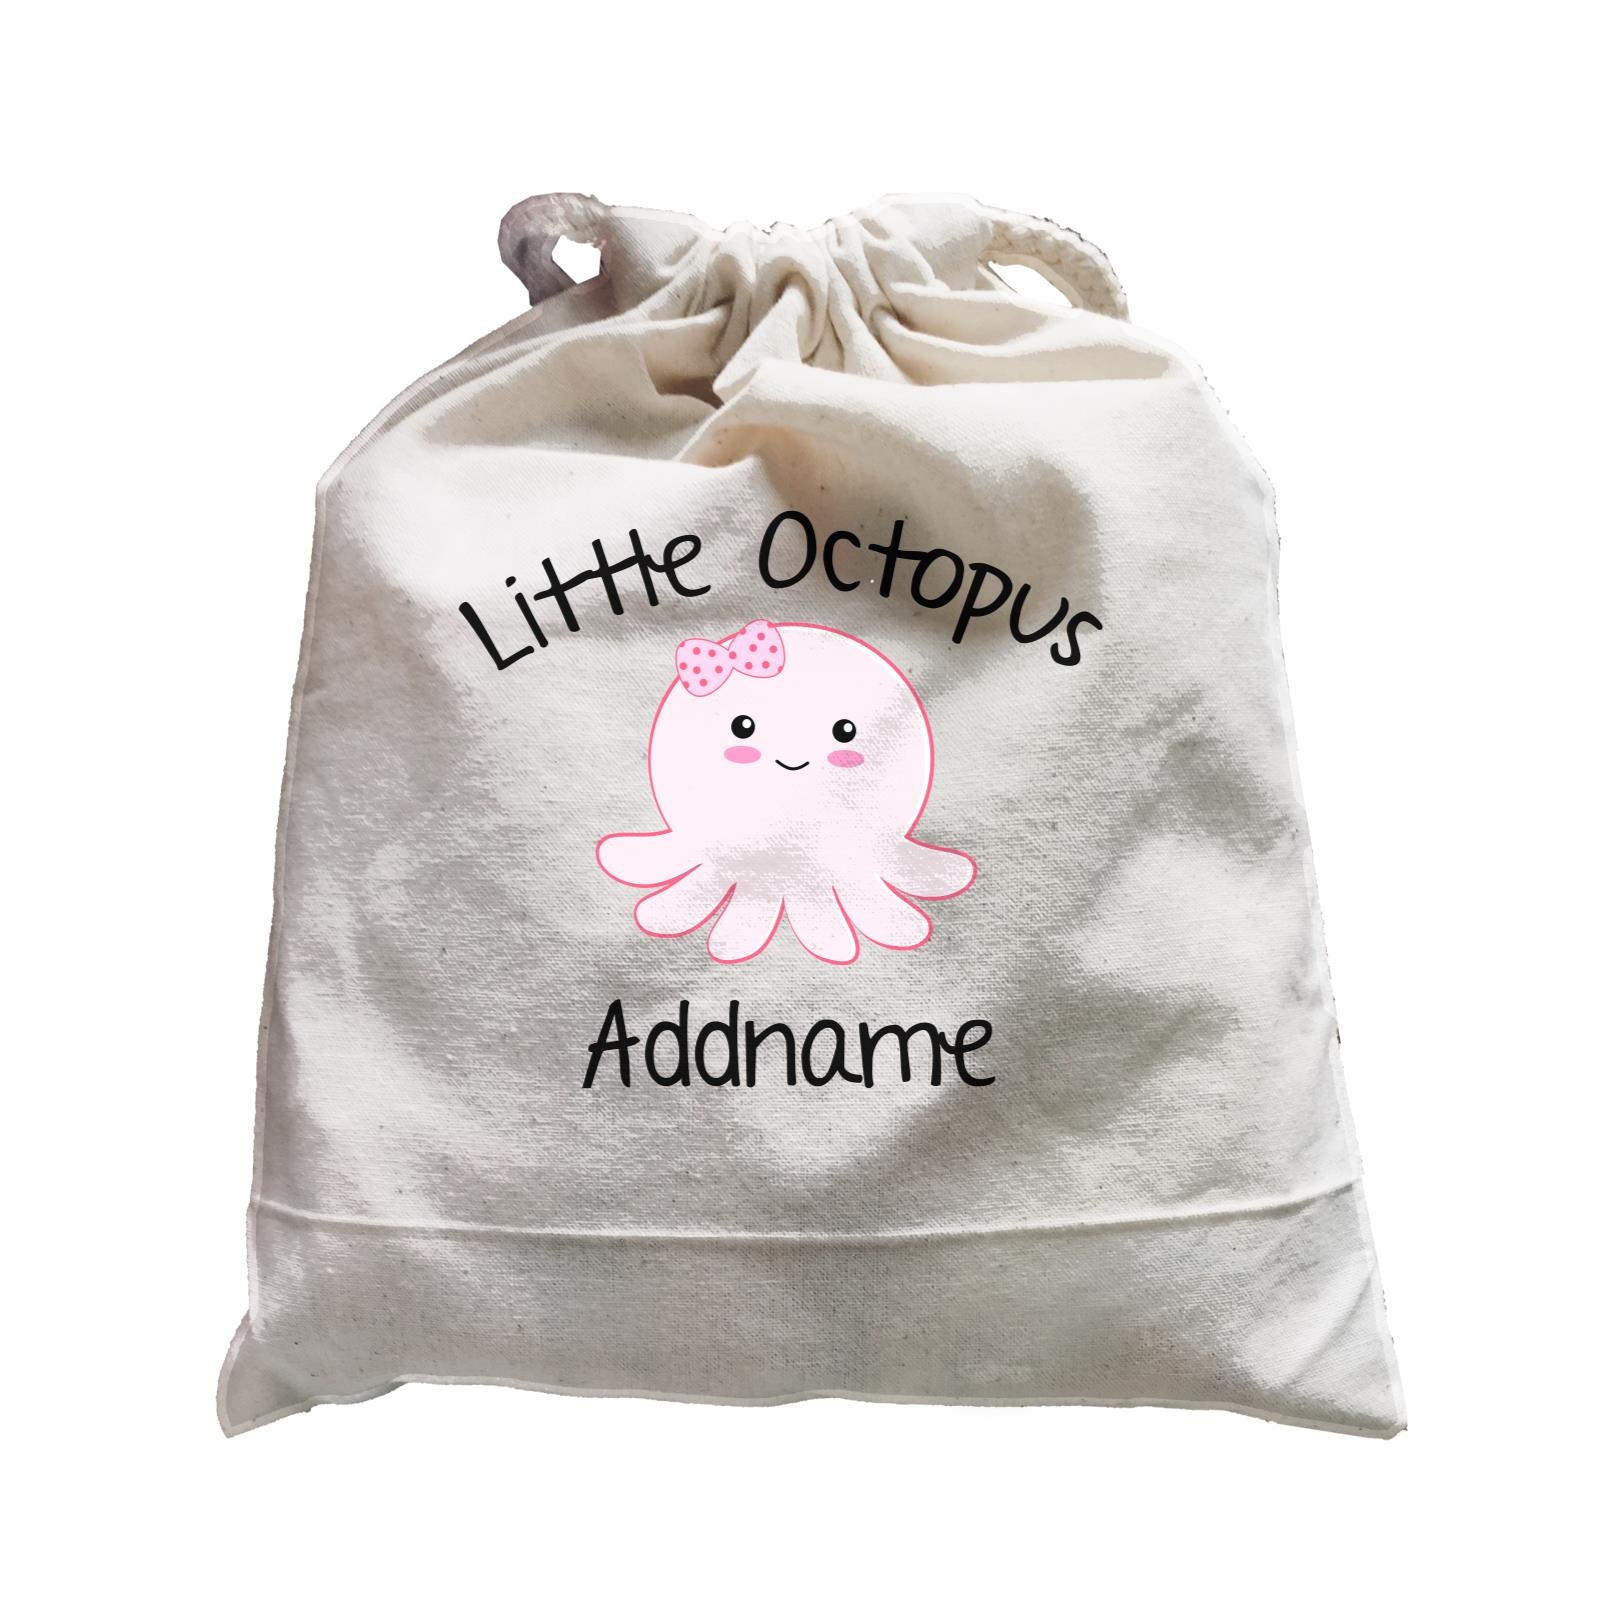 Cute Animals And Friends Series Little Octopus Girl Addname Satchel